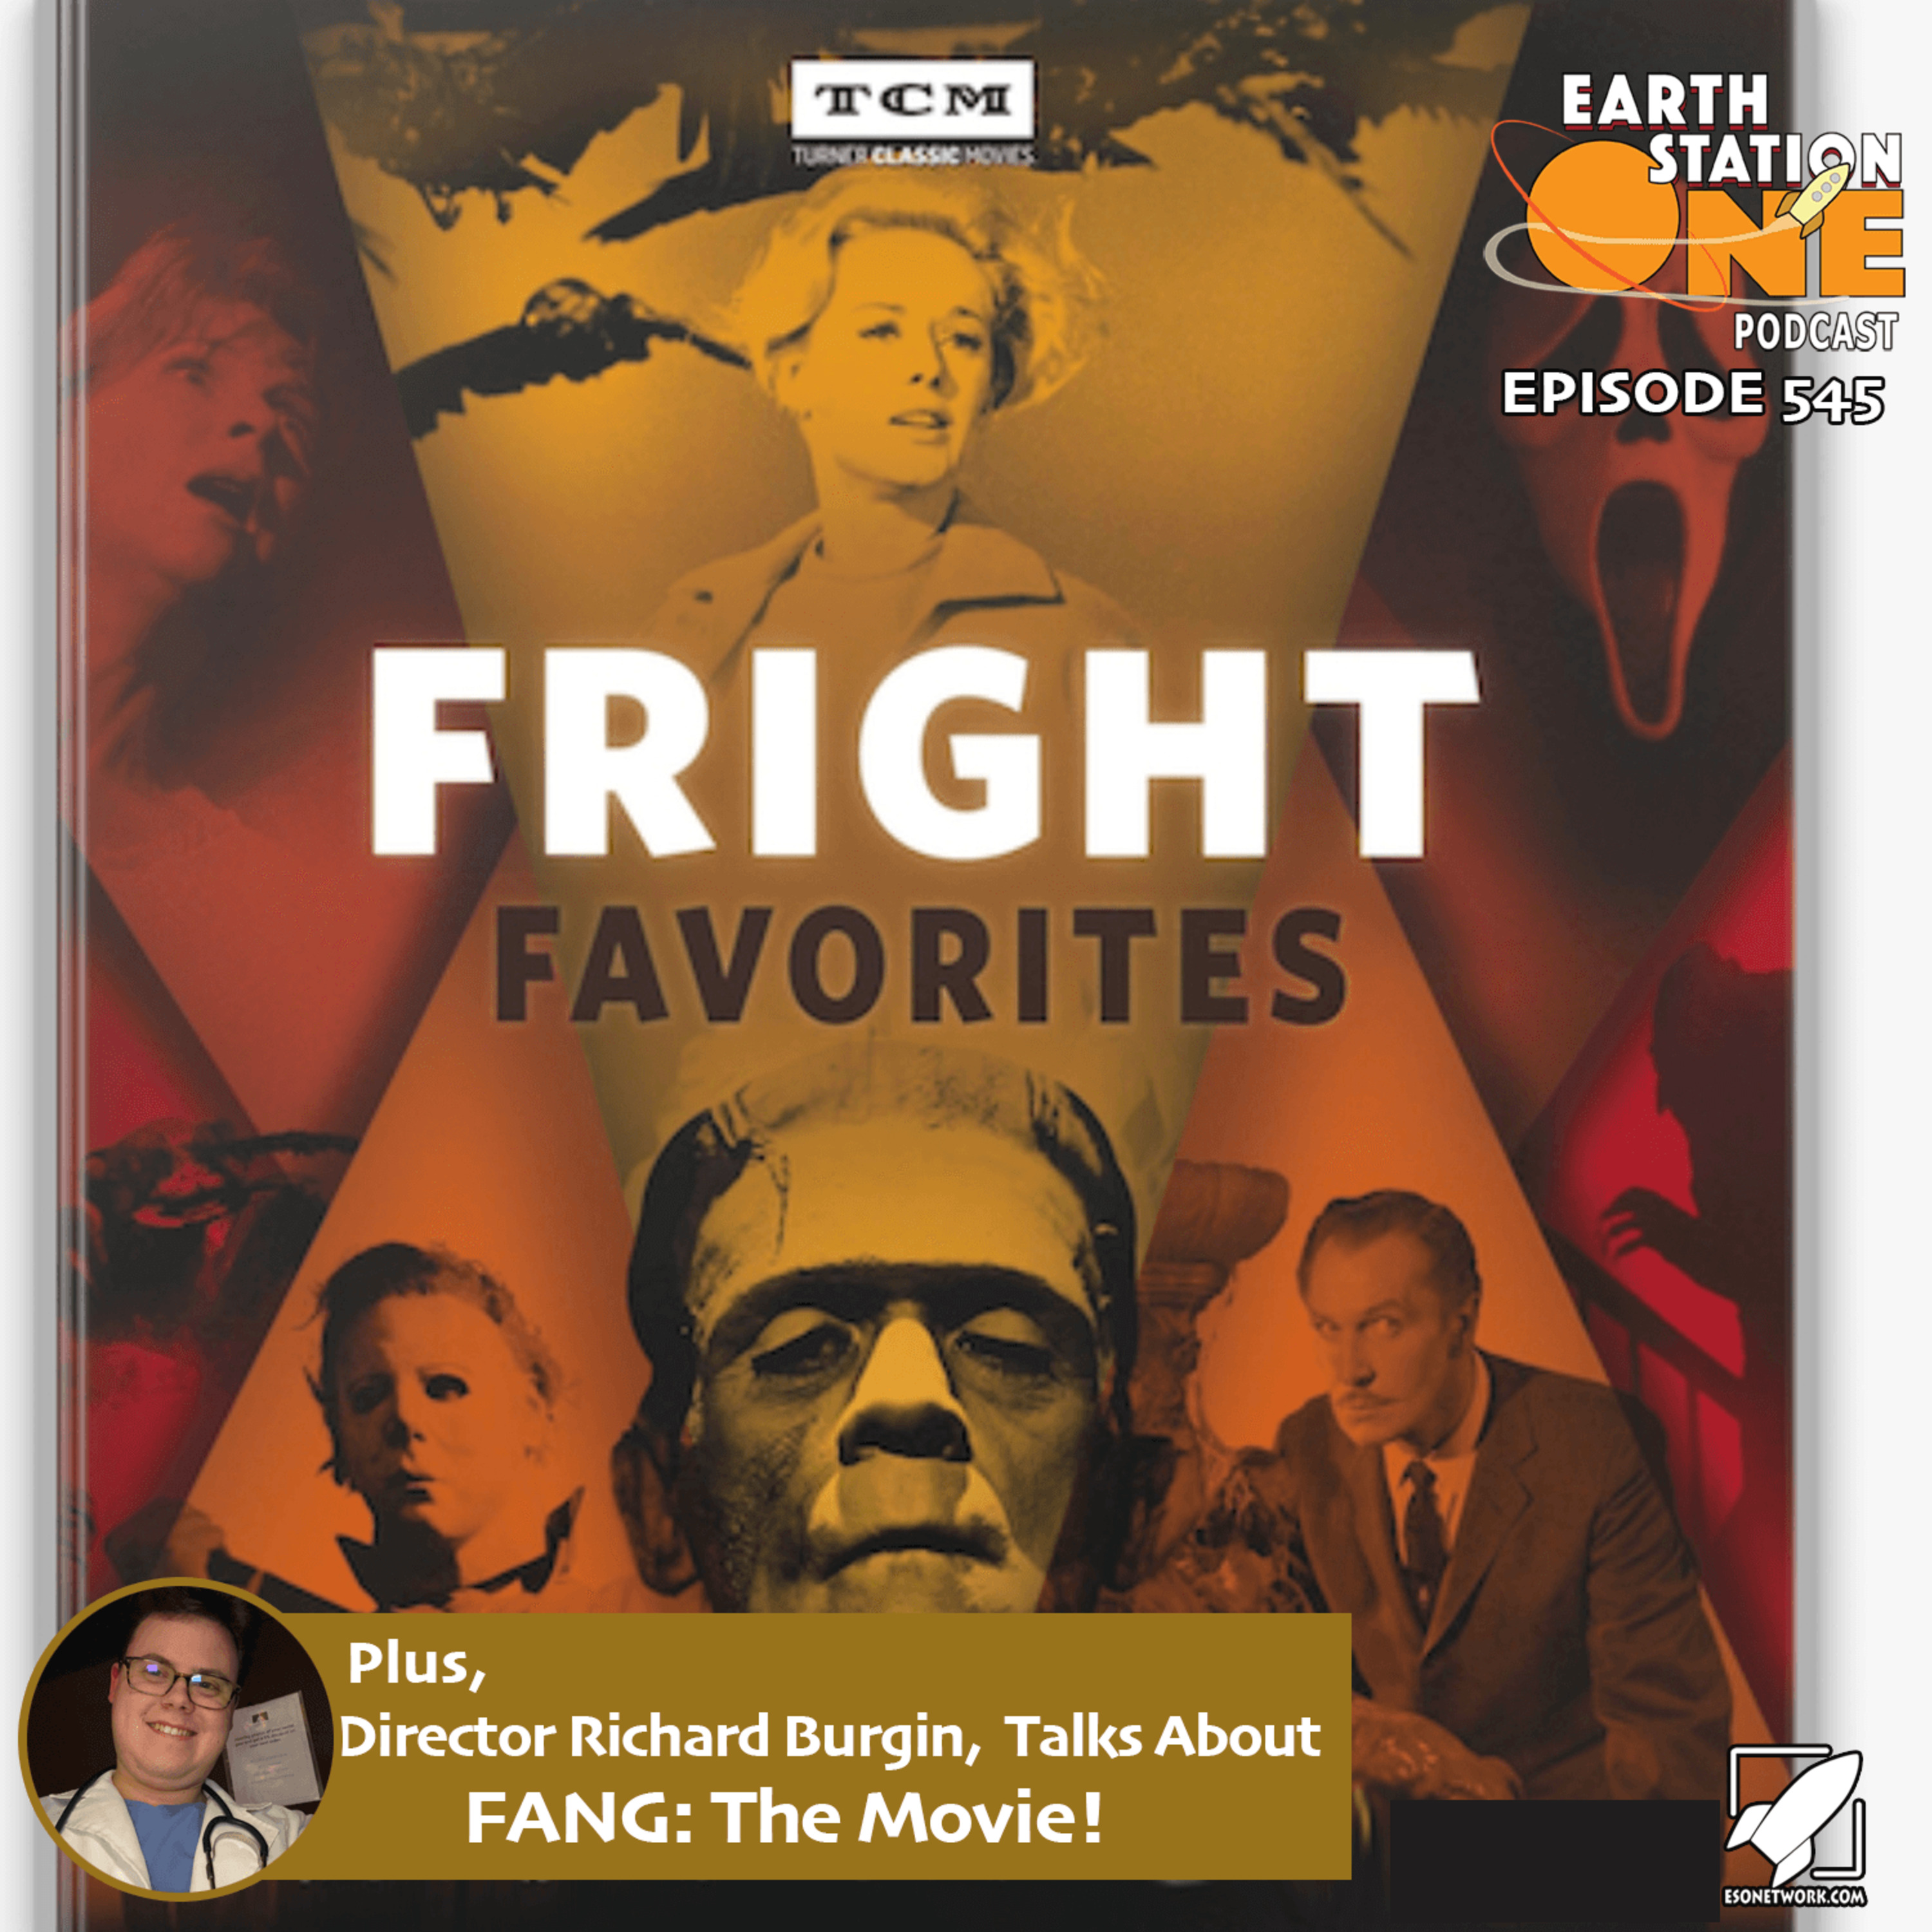 The Earth Station One Podcast – Fright Favorites with David J. Skal